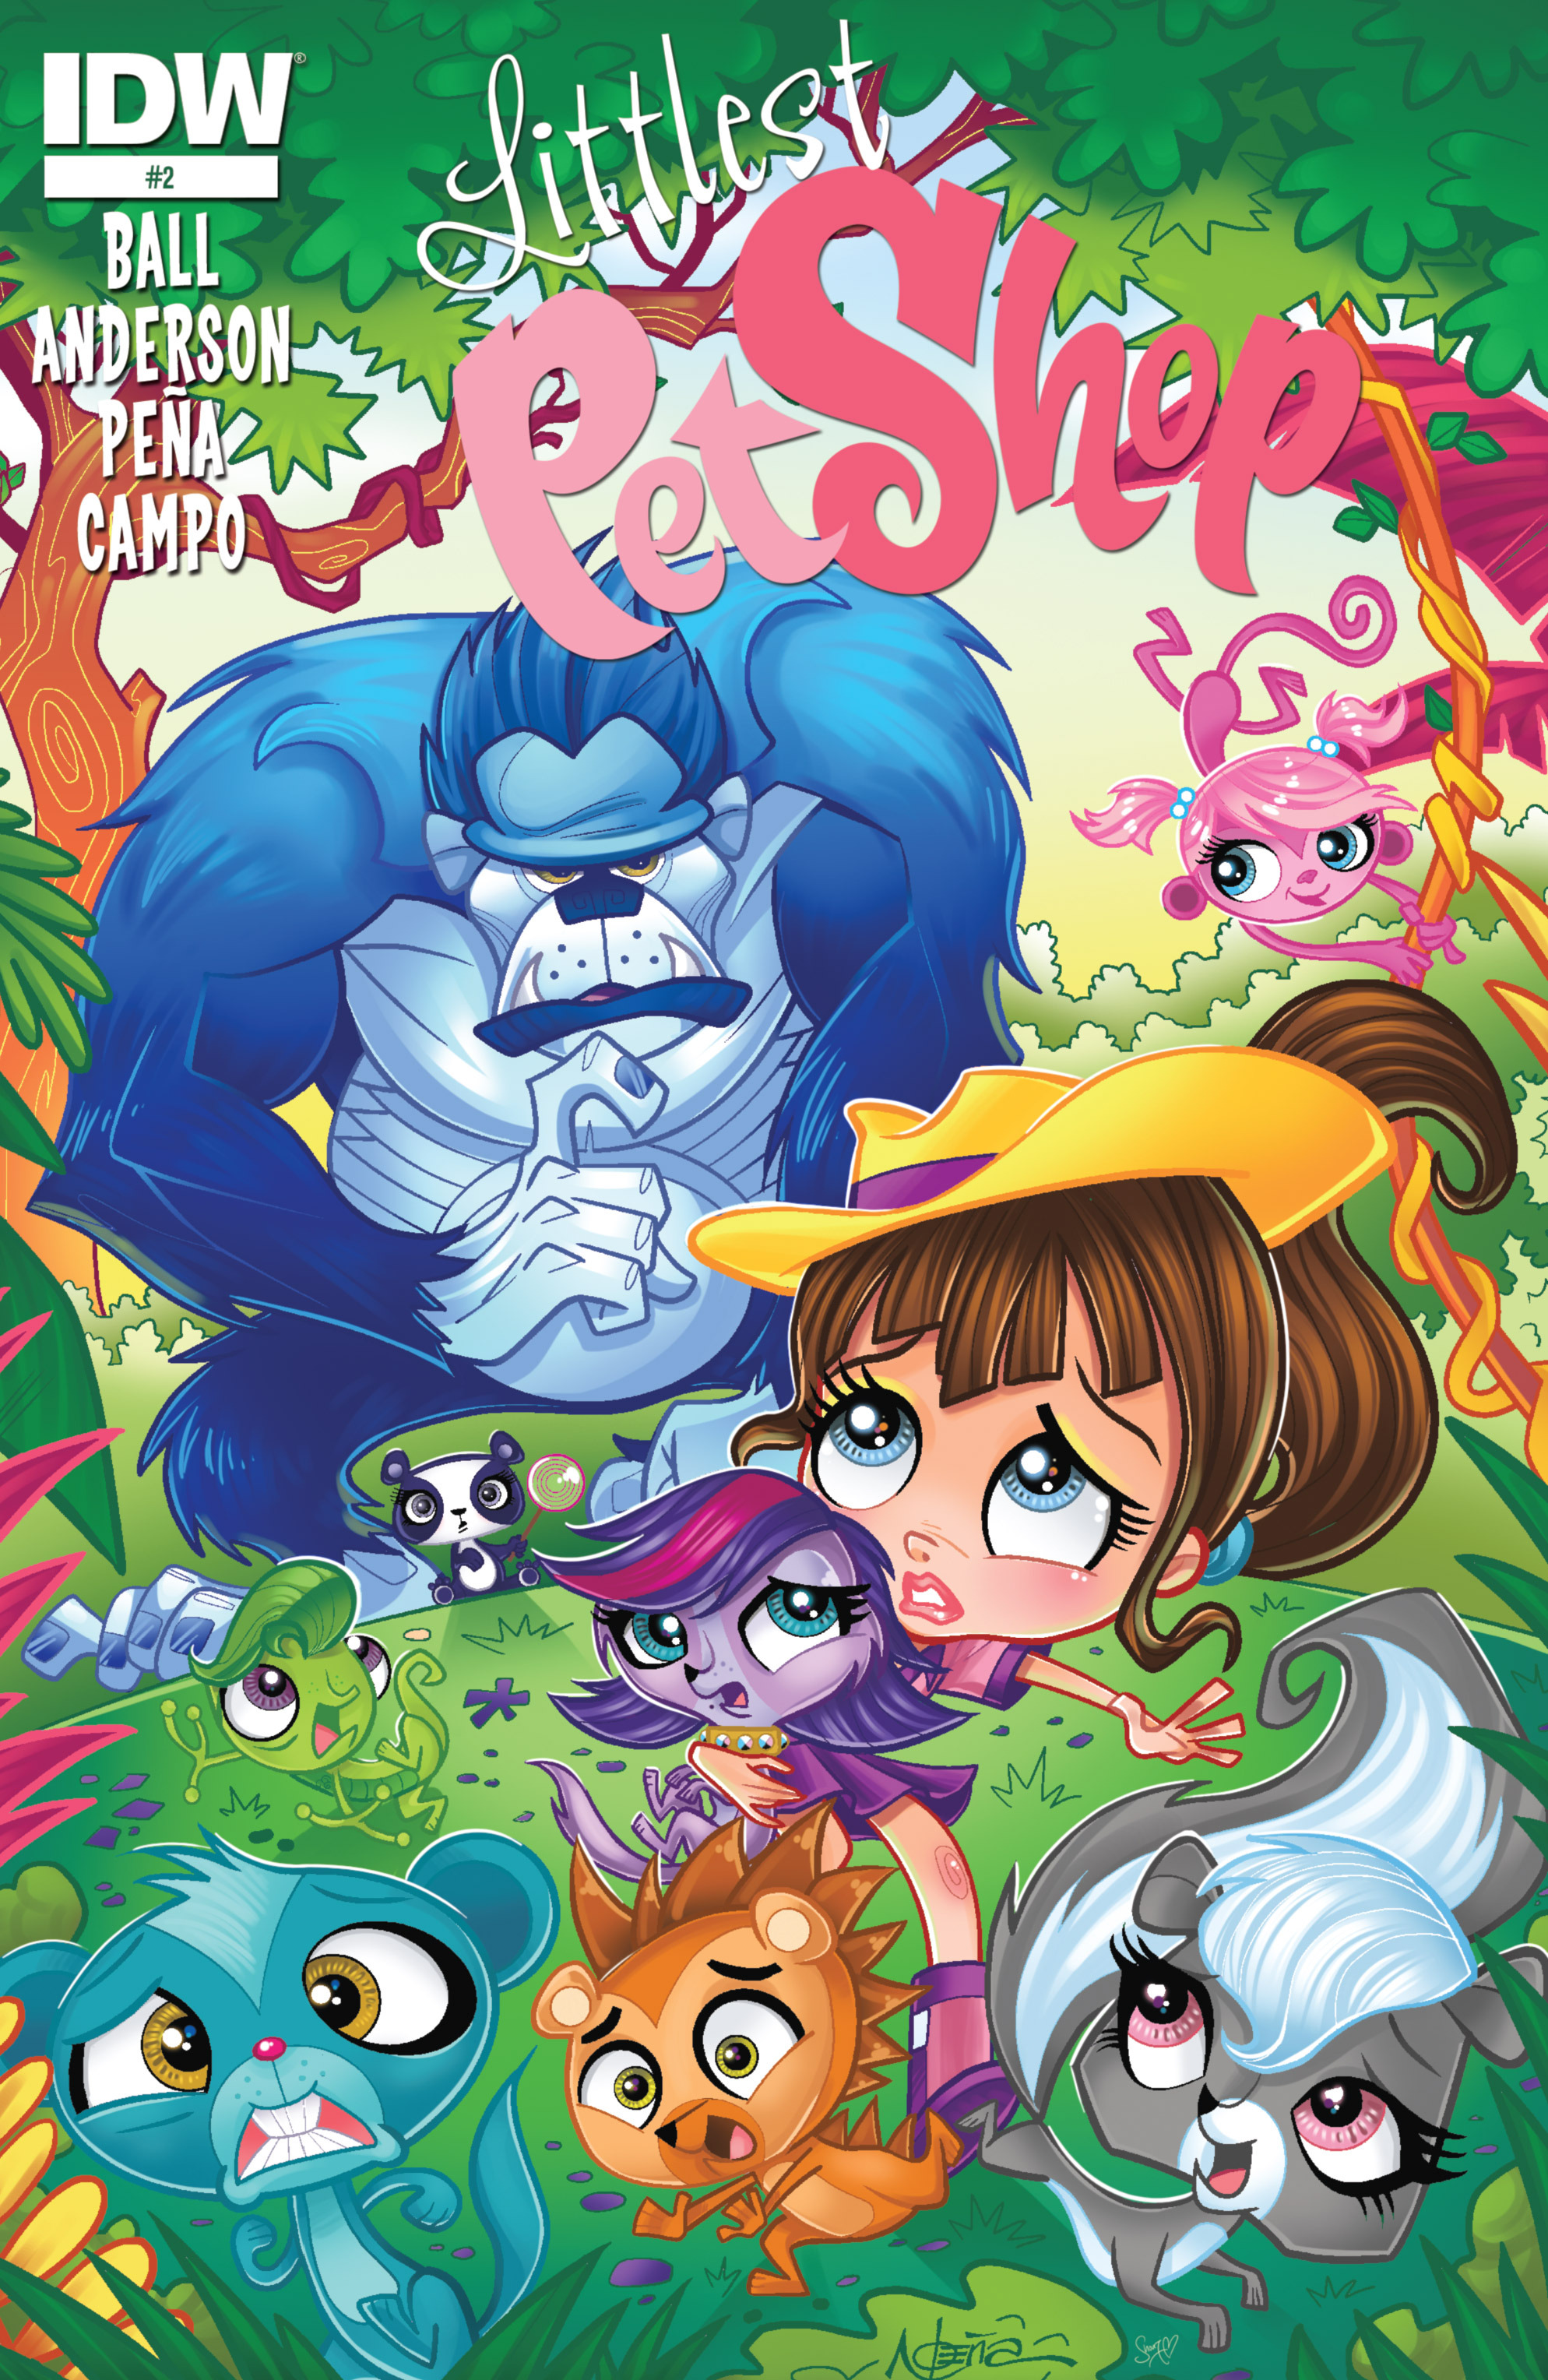 All Littlest Pet Shop Porn - Littlest Pet Shop Issue 2 | Read Littlest Pet Shop Issue 2 comic online in  high quality. Website to search, classify, summarize, and evaluate comics.